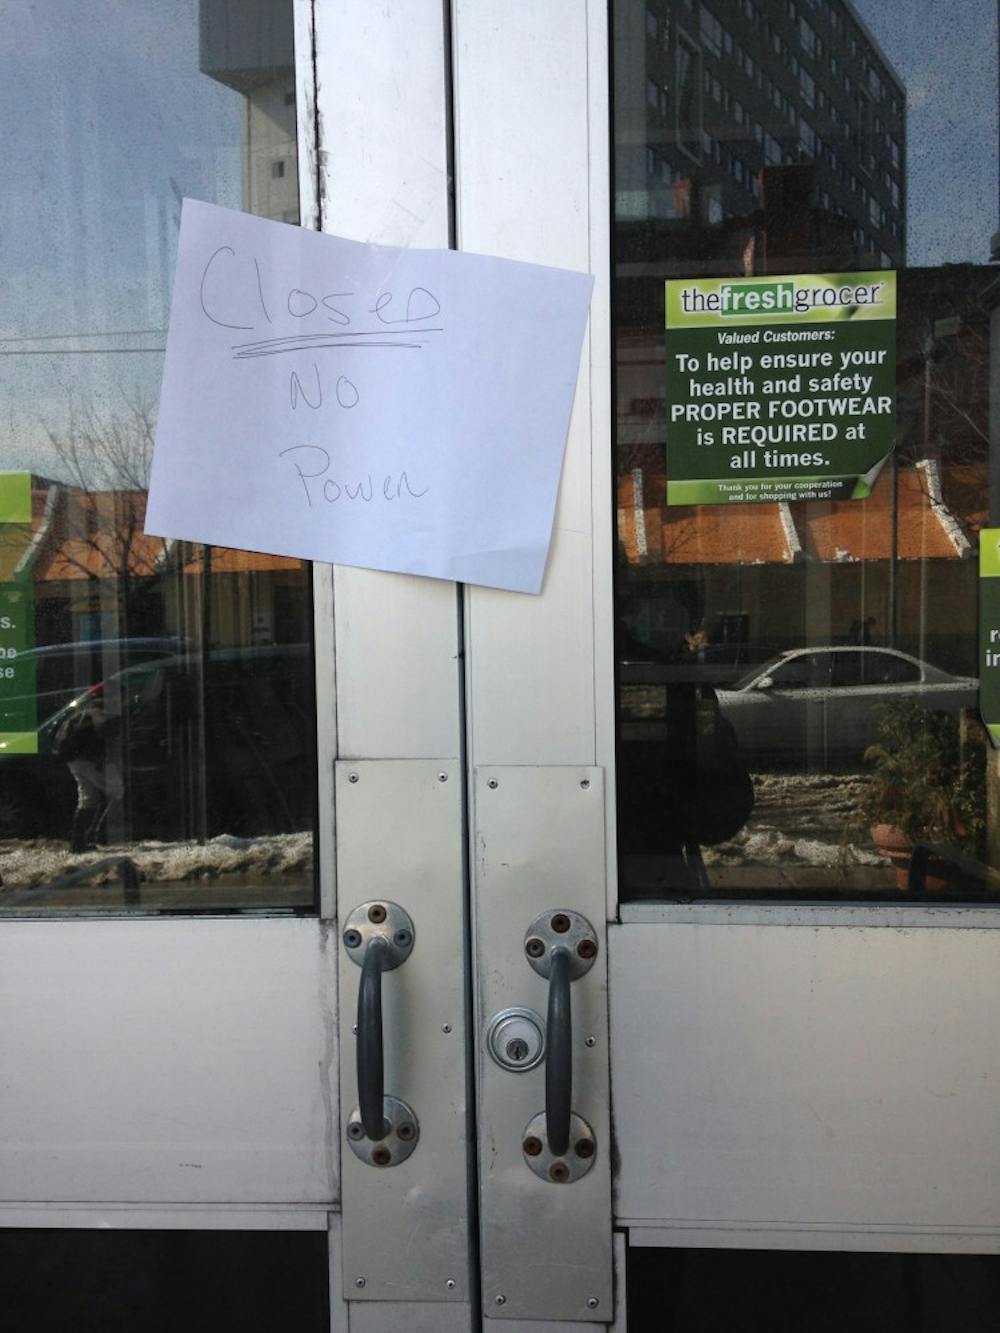 Stores like the Fresh Grocer put out signs to inform shoppers of the outage.